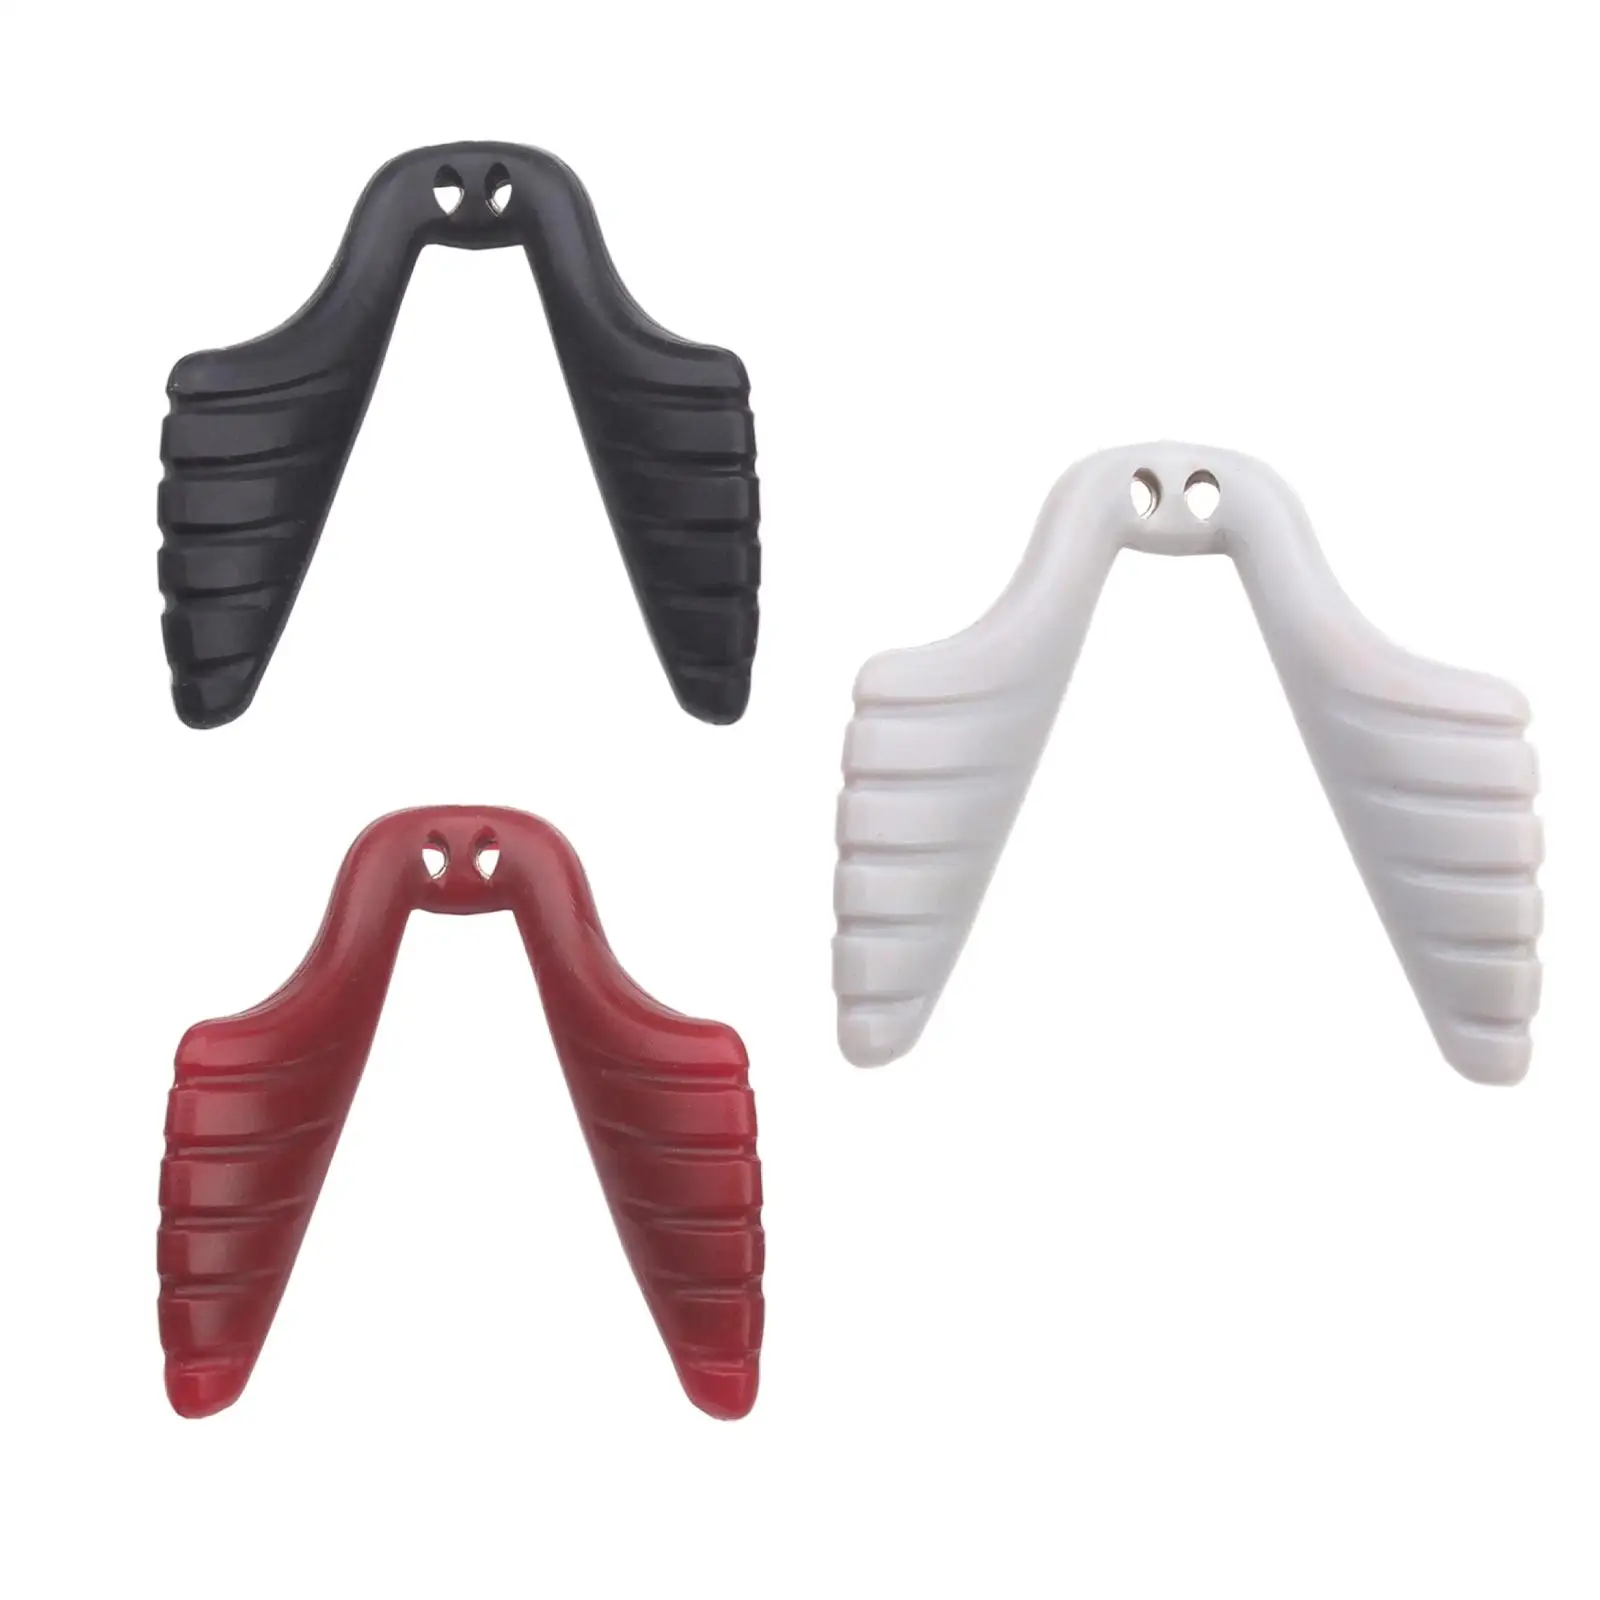 Glasses Nose Pad for Riding Cycling Eyeglass Frames Lightweight with Double Holes U Shaped Soft Stick On Nose Pad for Spectacles